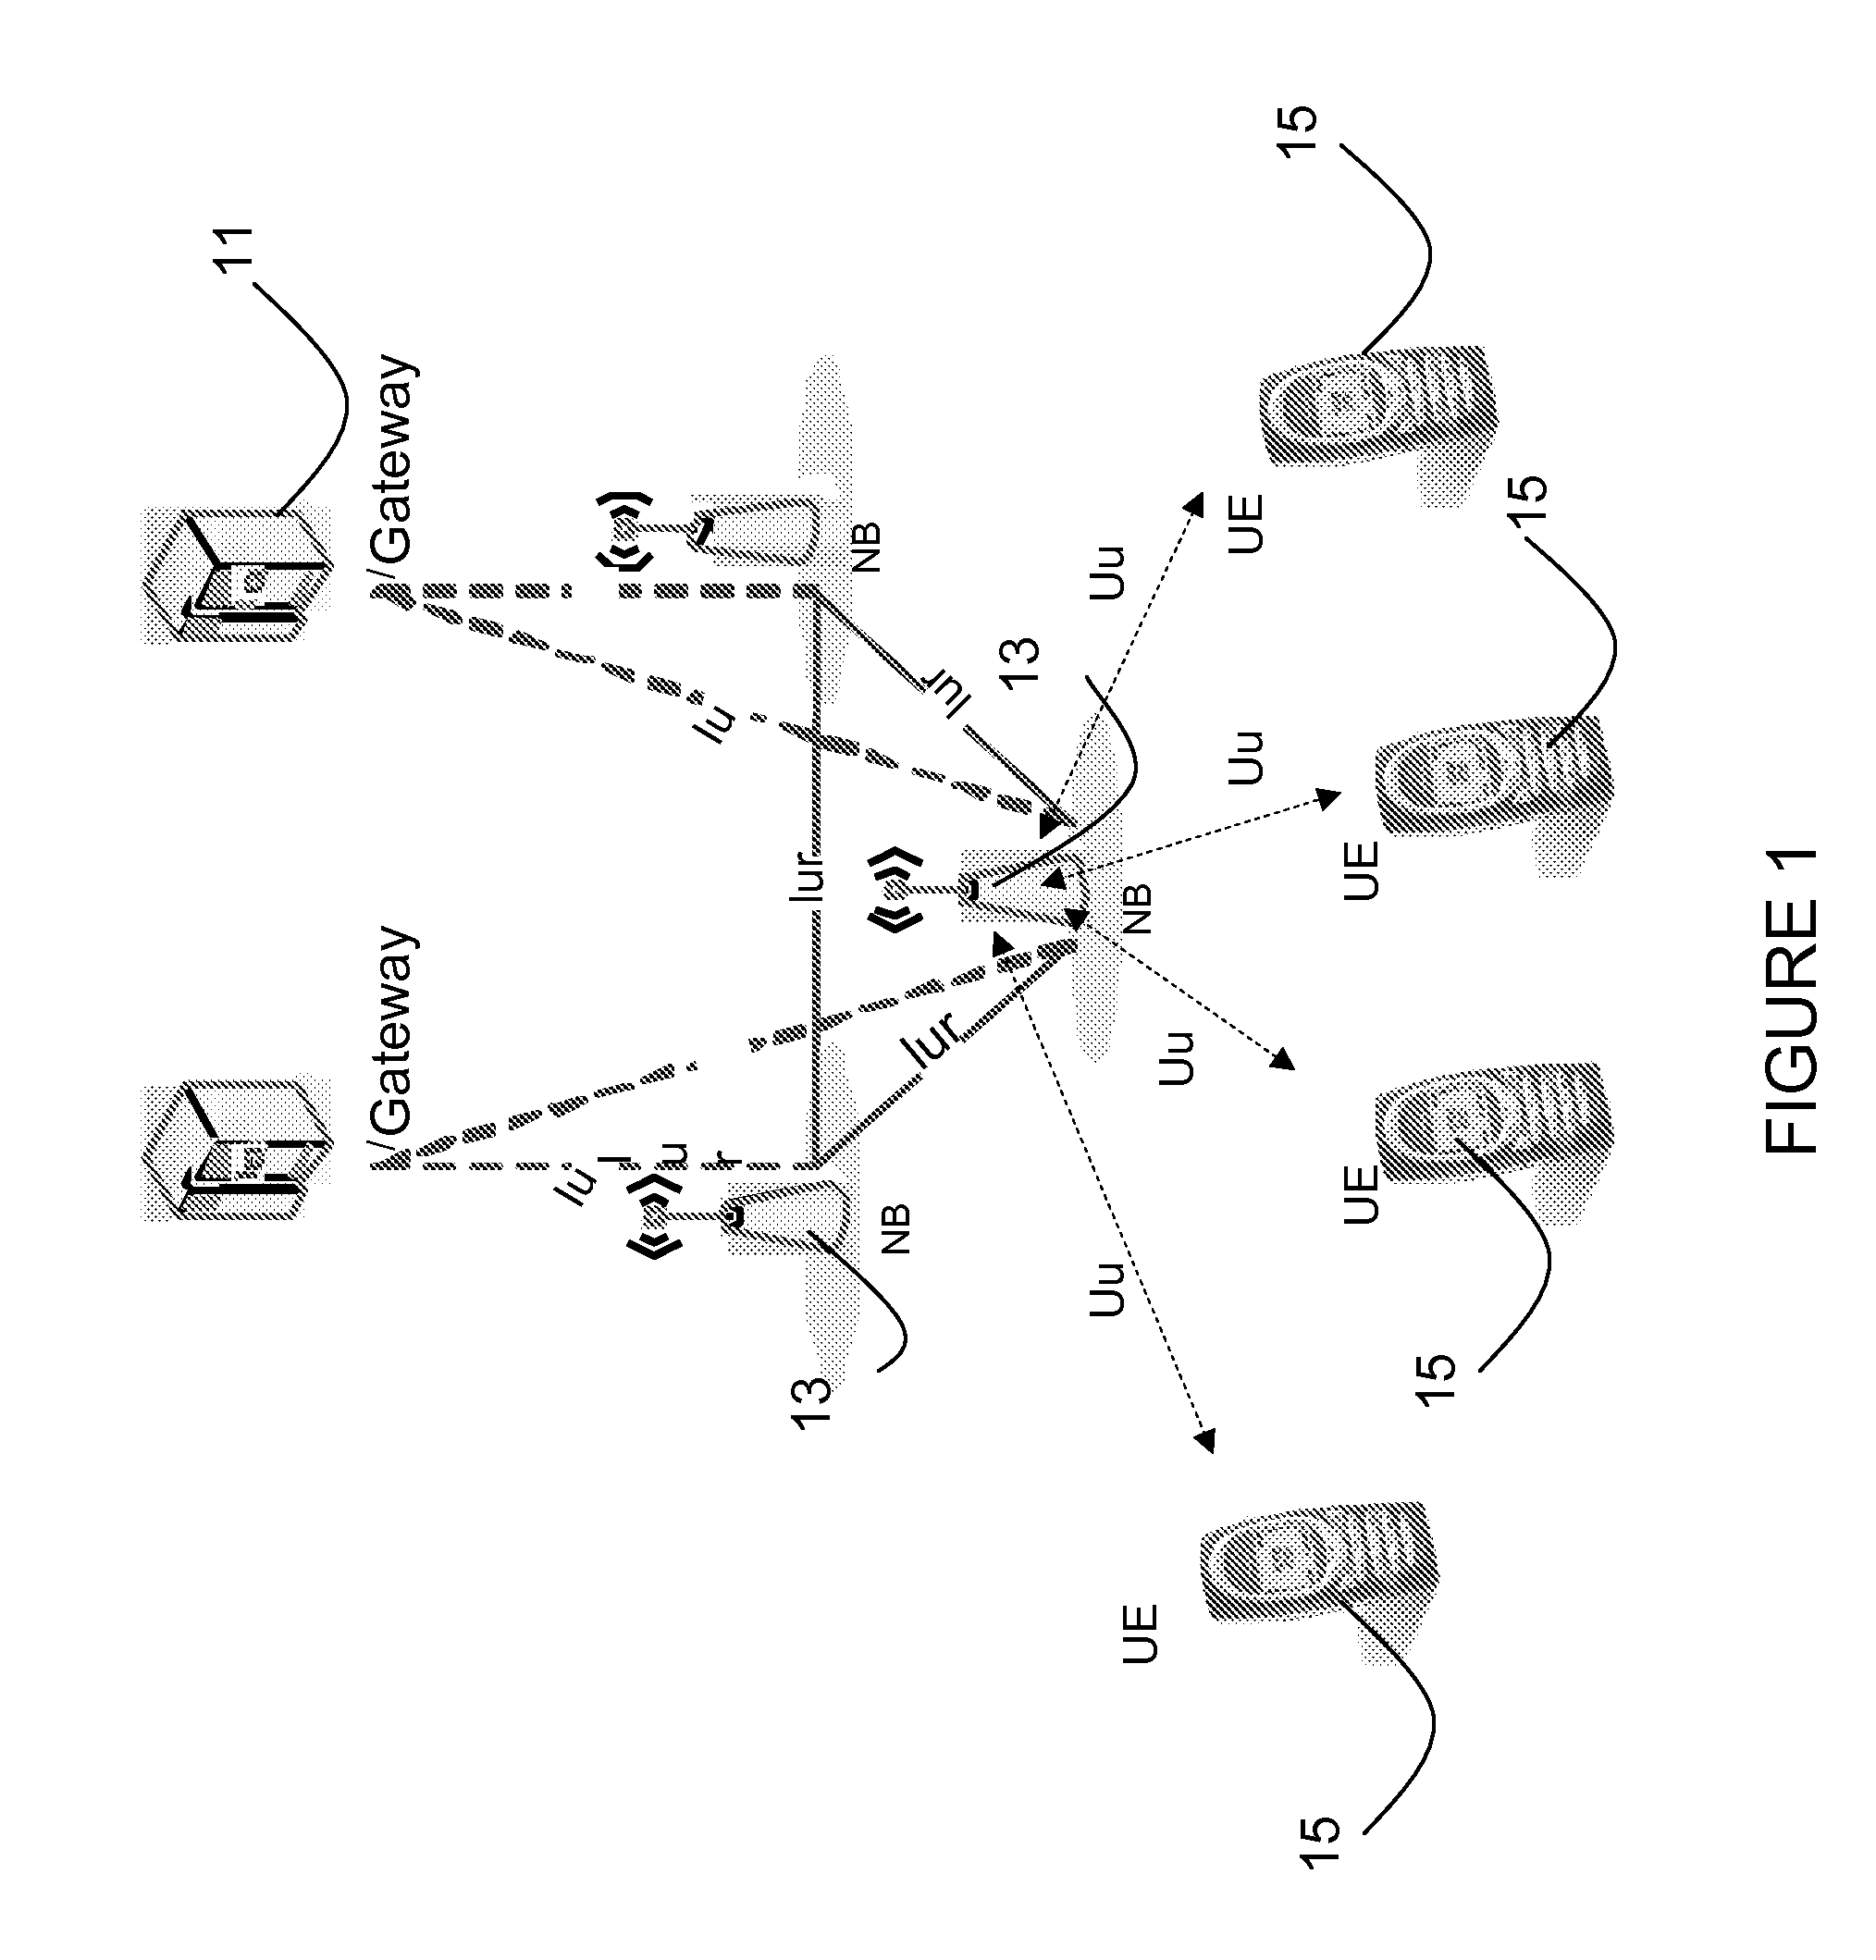 Control Signaling for Multiple Carrier High Speed Uplink Packet Access in Radio Frequency Communication Systems